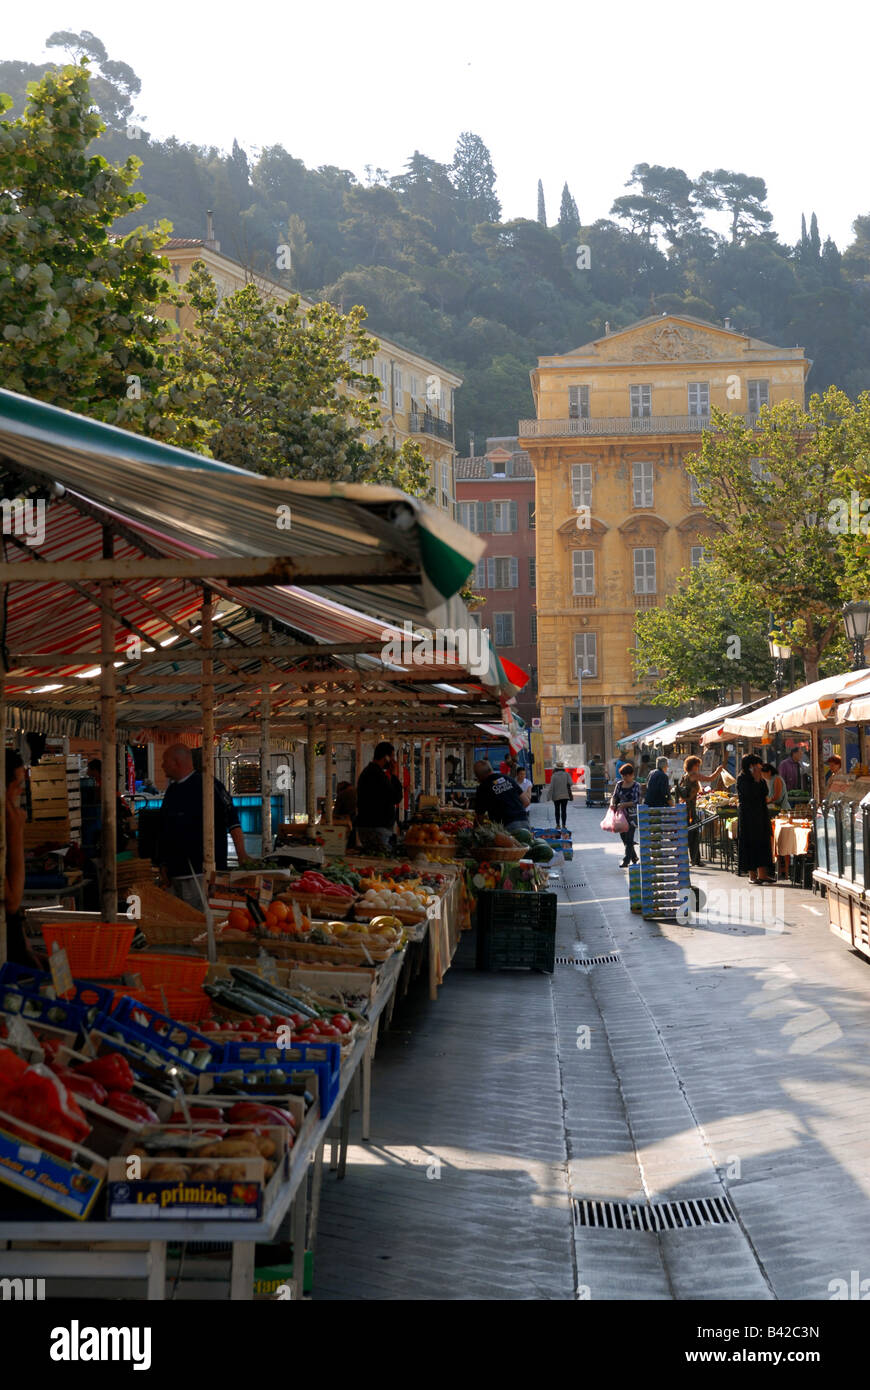 The market on the Cours Saleya in the old town Vieux Nice Nice Cote d Azur French Riviera France Stock Photo